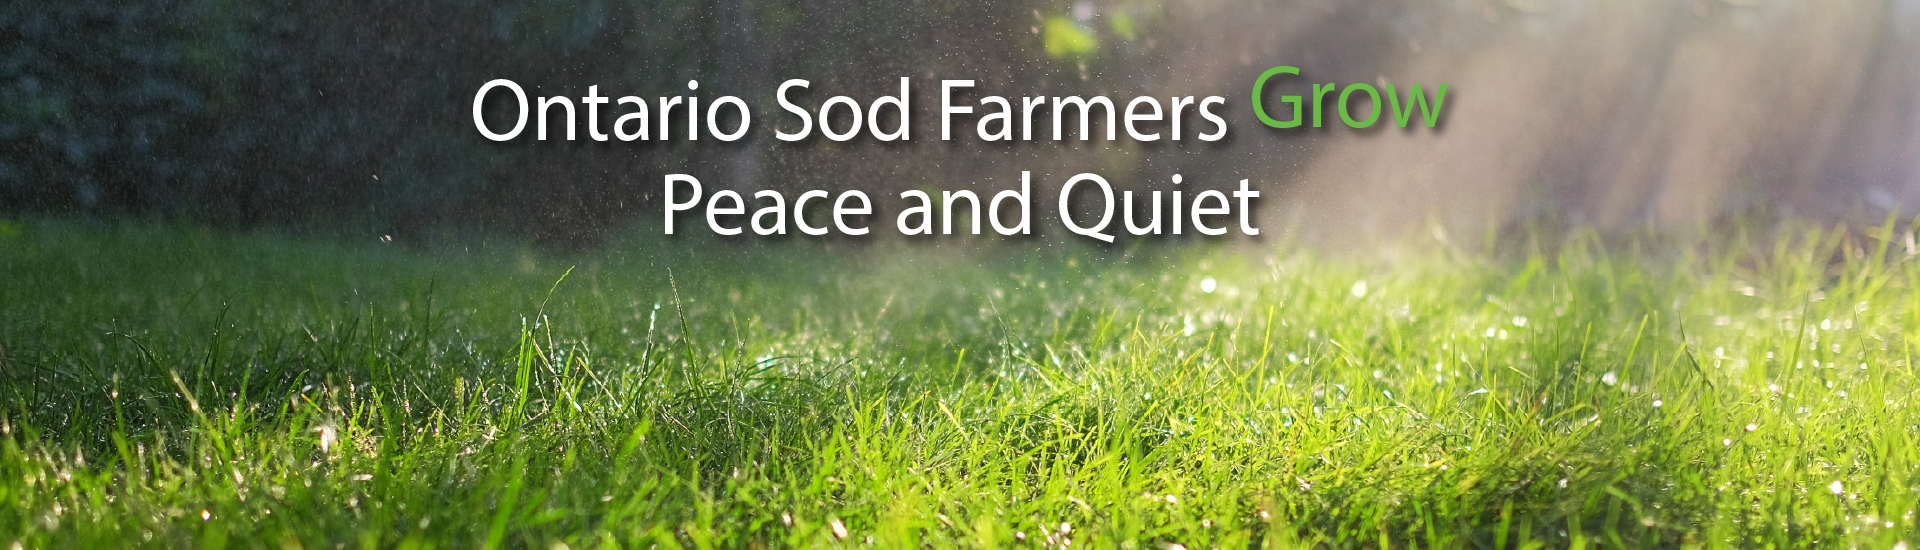 Ontario Sod Farmers Grow Peace and Quiet